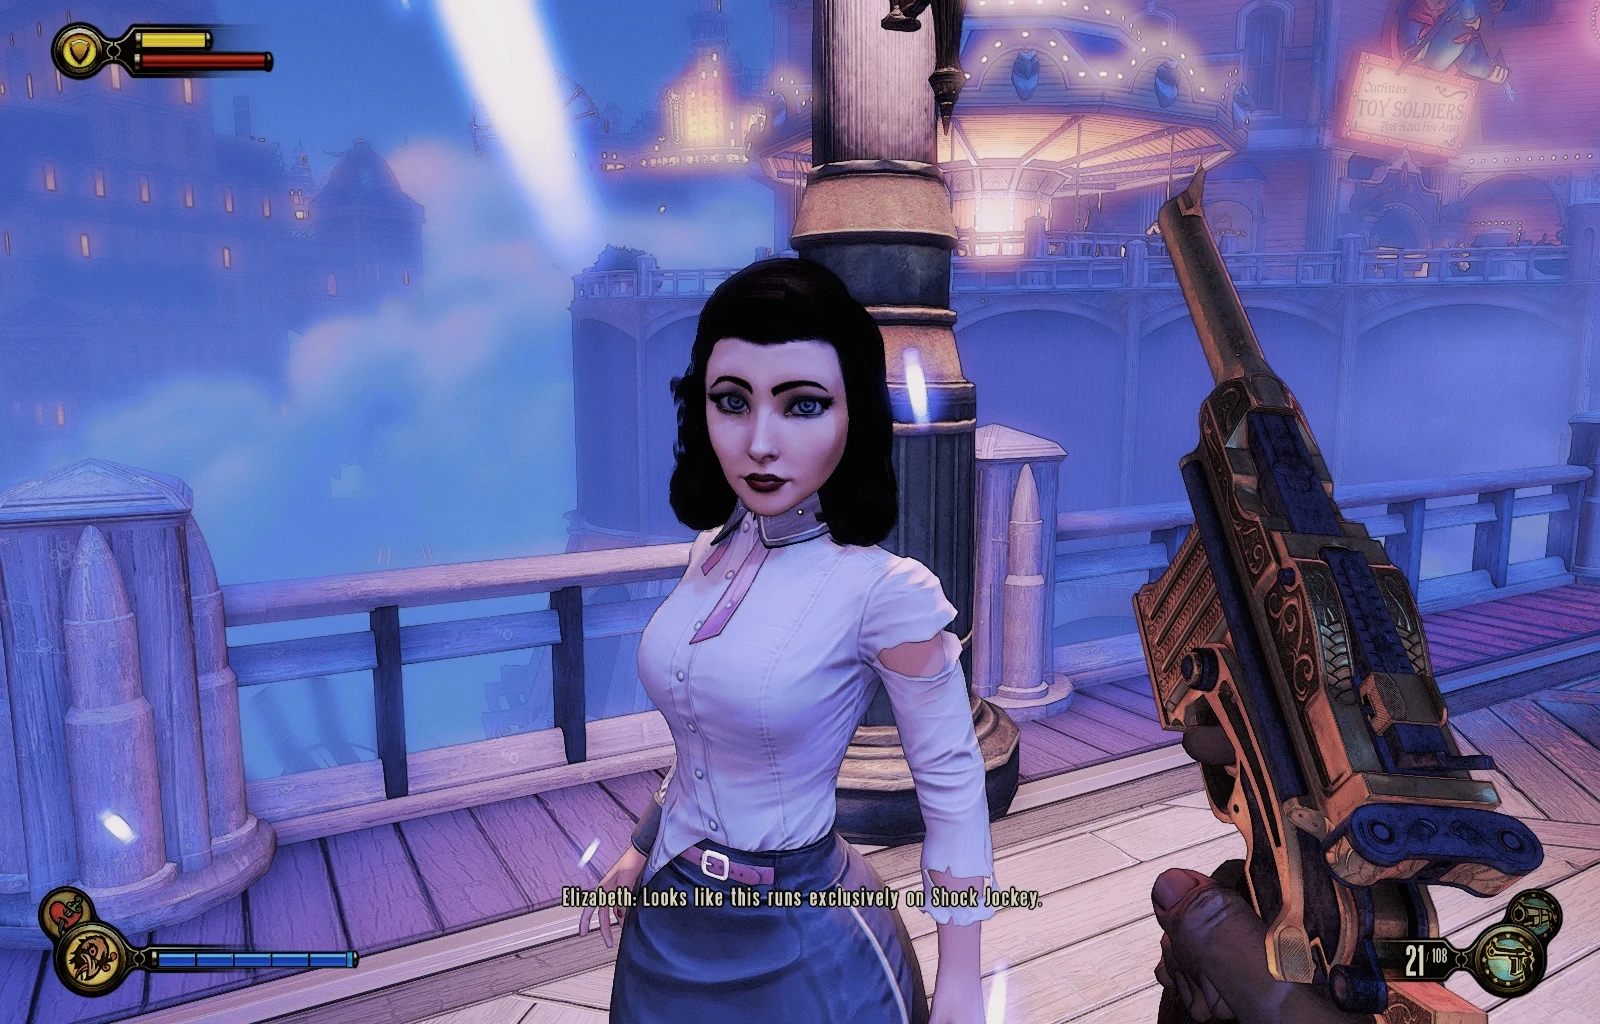 BioShock Infinite Burial at Sea Elizabeth Mod at Remnant: From the Ashes  Nexus - Mods and community